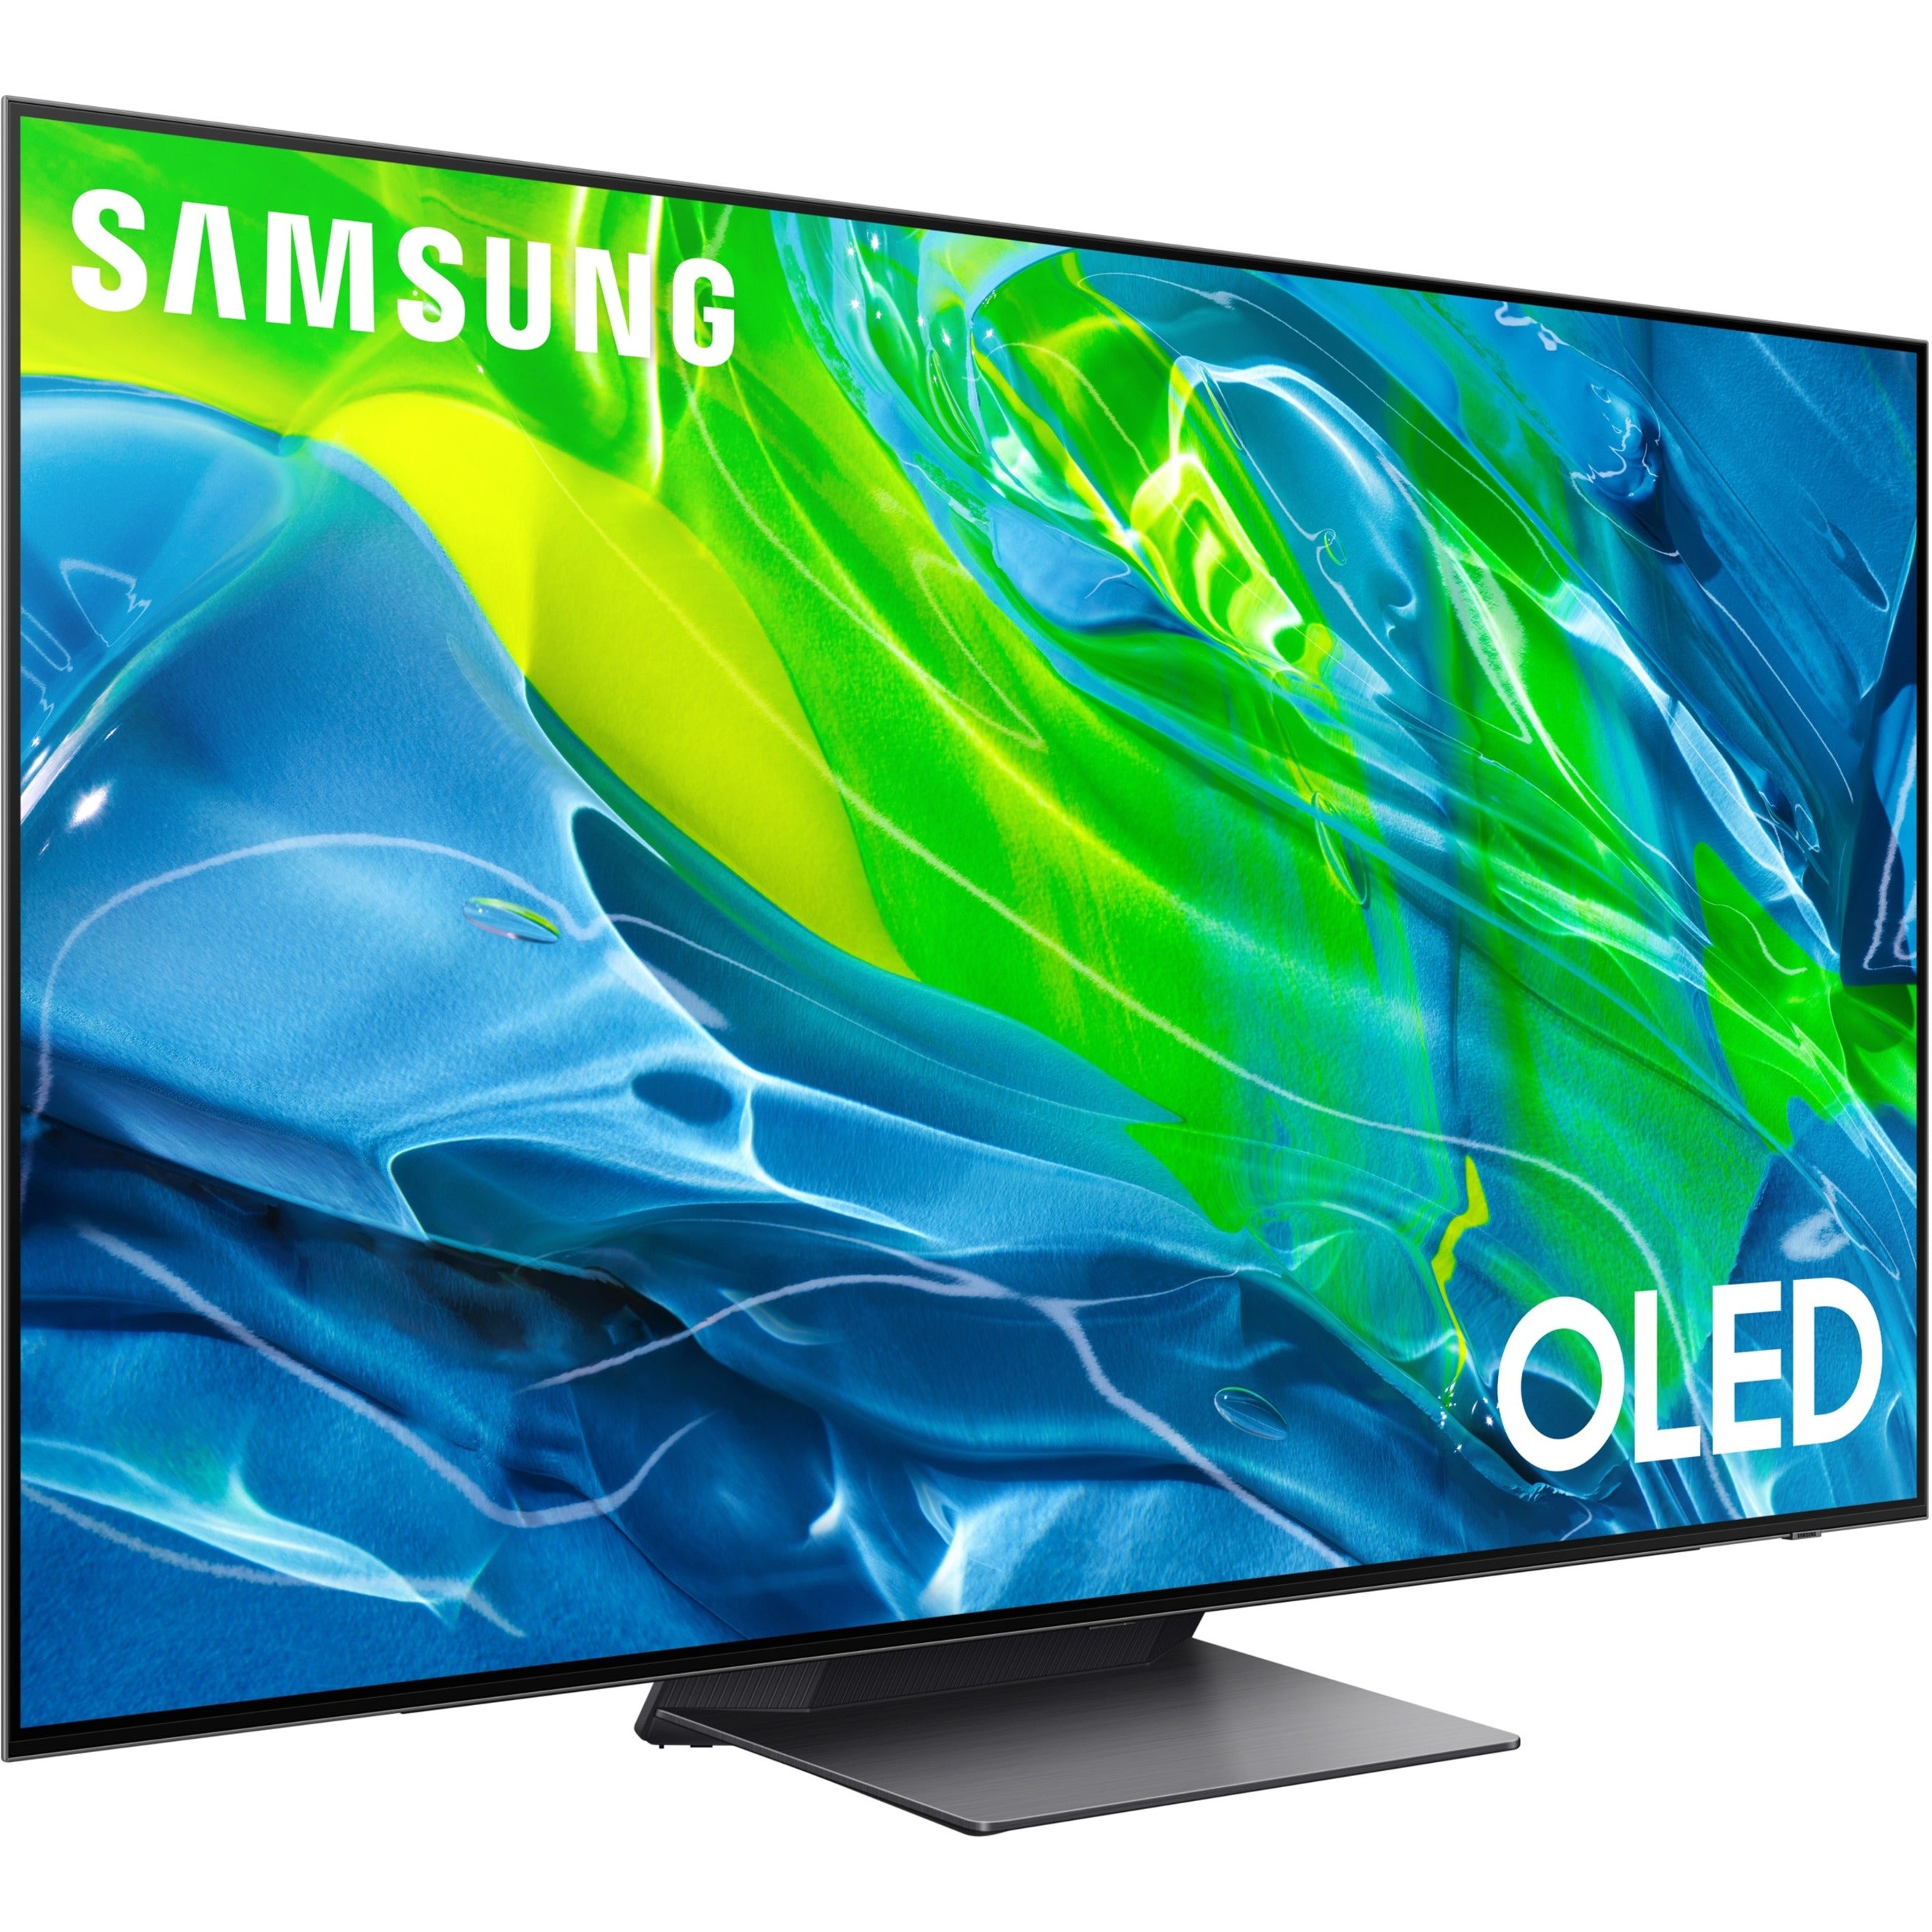 Samsung QN65S95BAFXZA 65 Class S95B OLED 4K Smart TV (2022), 120Hz, 4 HDMI Ports, Color Volume 100%, Neo Quantum Processor 4K with AI Upscaling, Object Tracking Sound, Ambient Mode +, SolarCell Remote